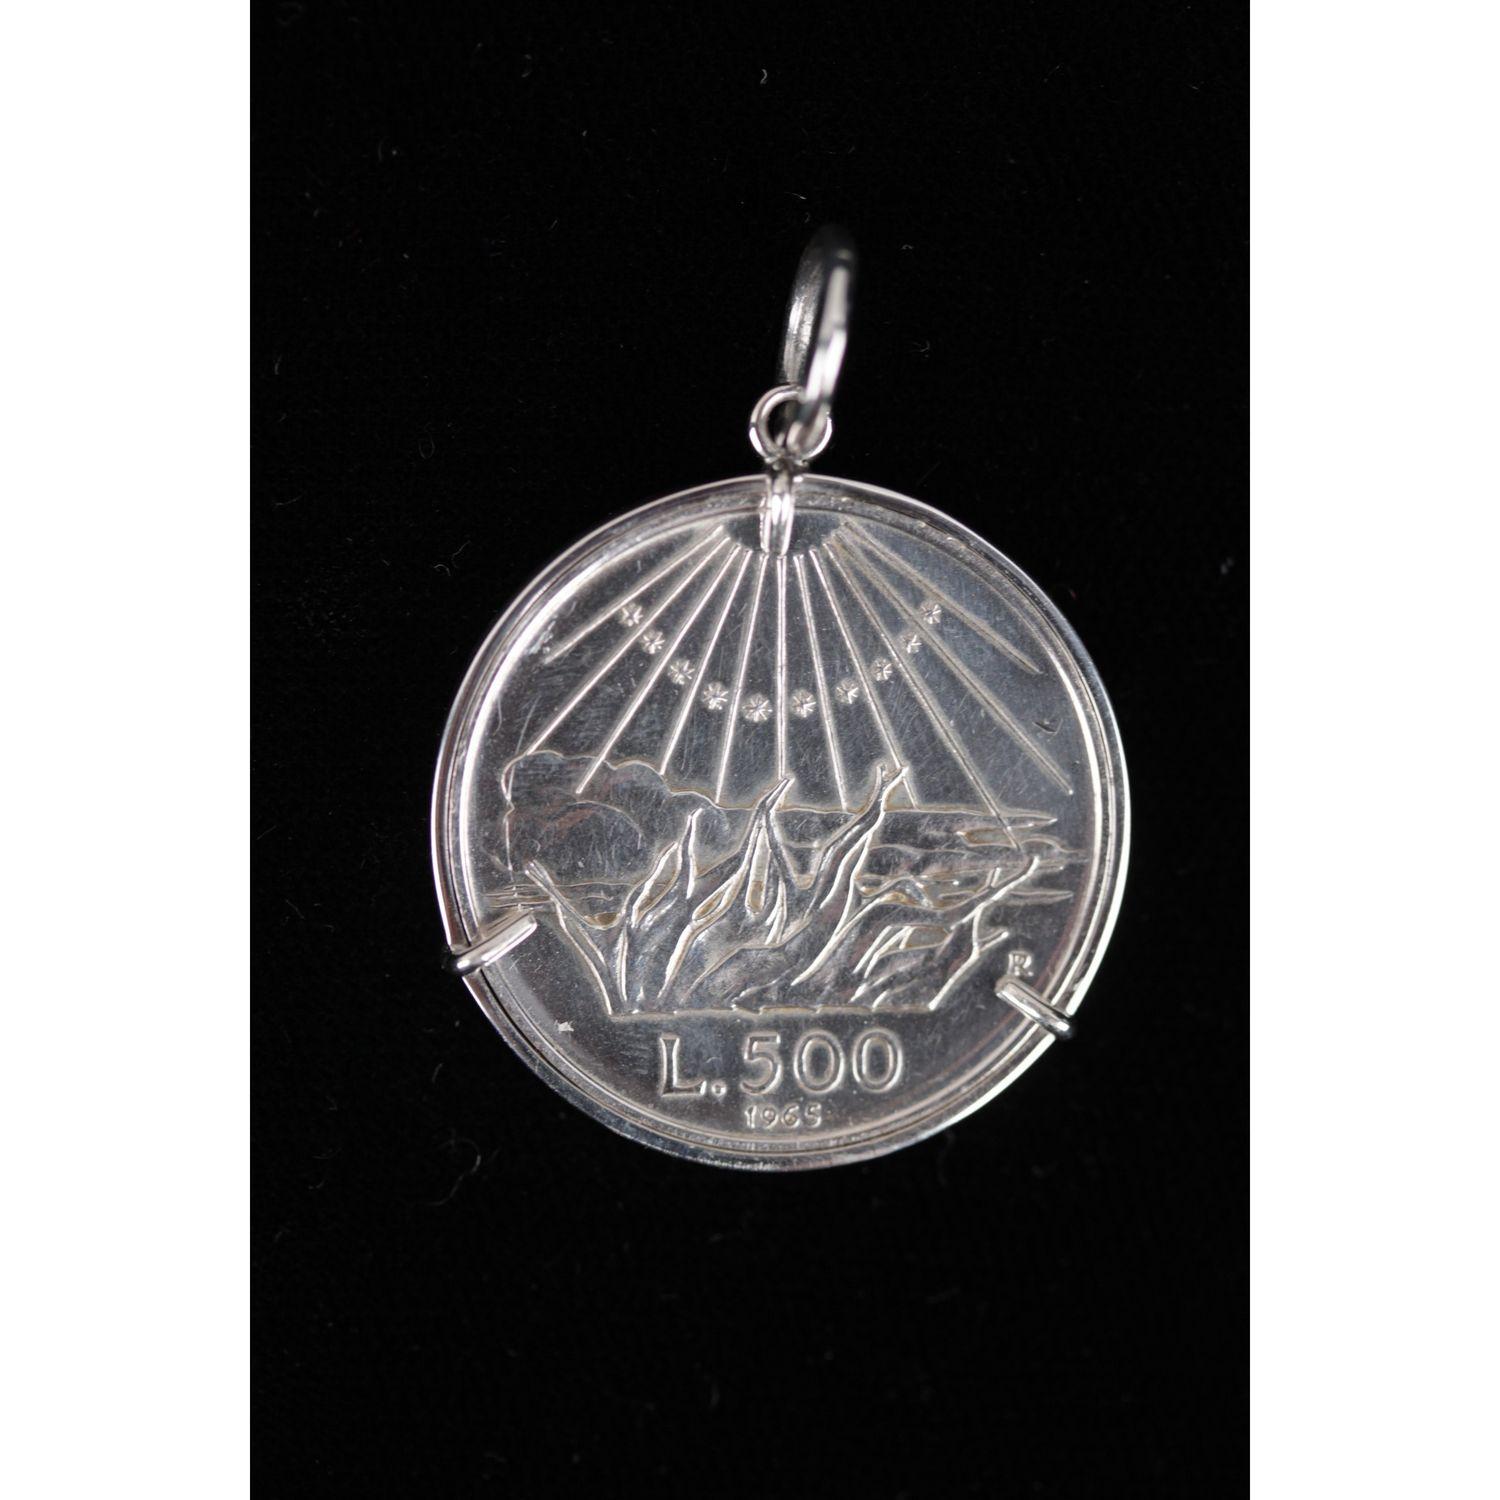 Handmade 500 lire silver coin pendant, celebrating the 700th Anniversary of the birth of Dante Alighieri. The coin is set in a 925 Sterling silver bezel (engraved 925 hallmark on the frame) Front: Flames, reminiscent of his famous work, Dante's